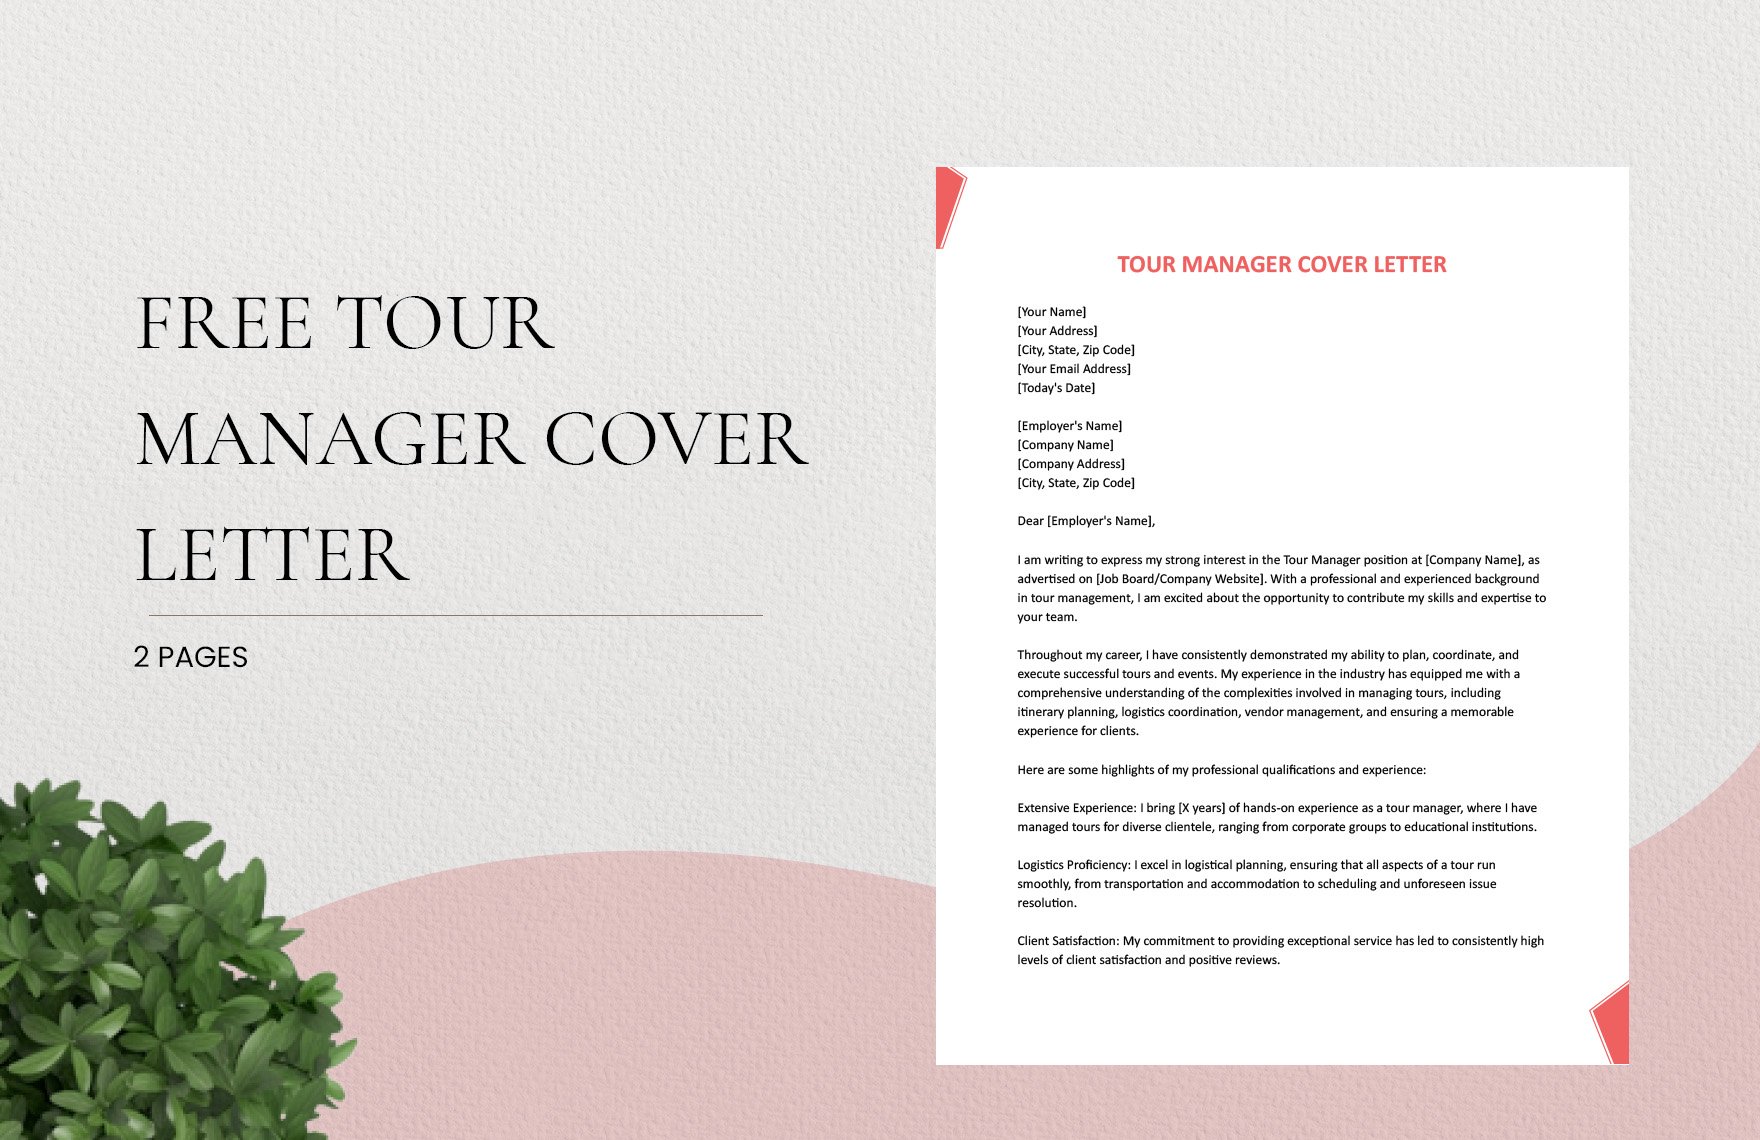 Tour Manager Cover Letter in Word